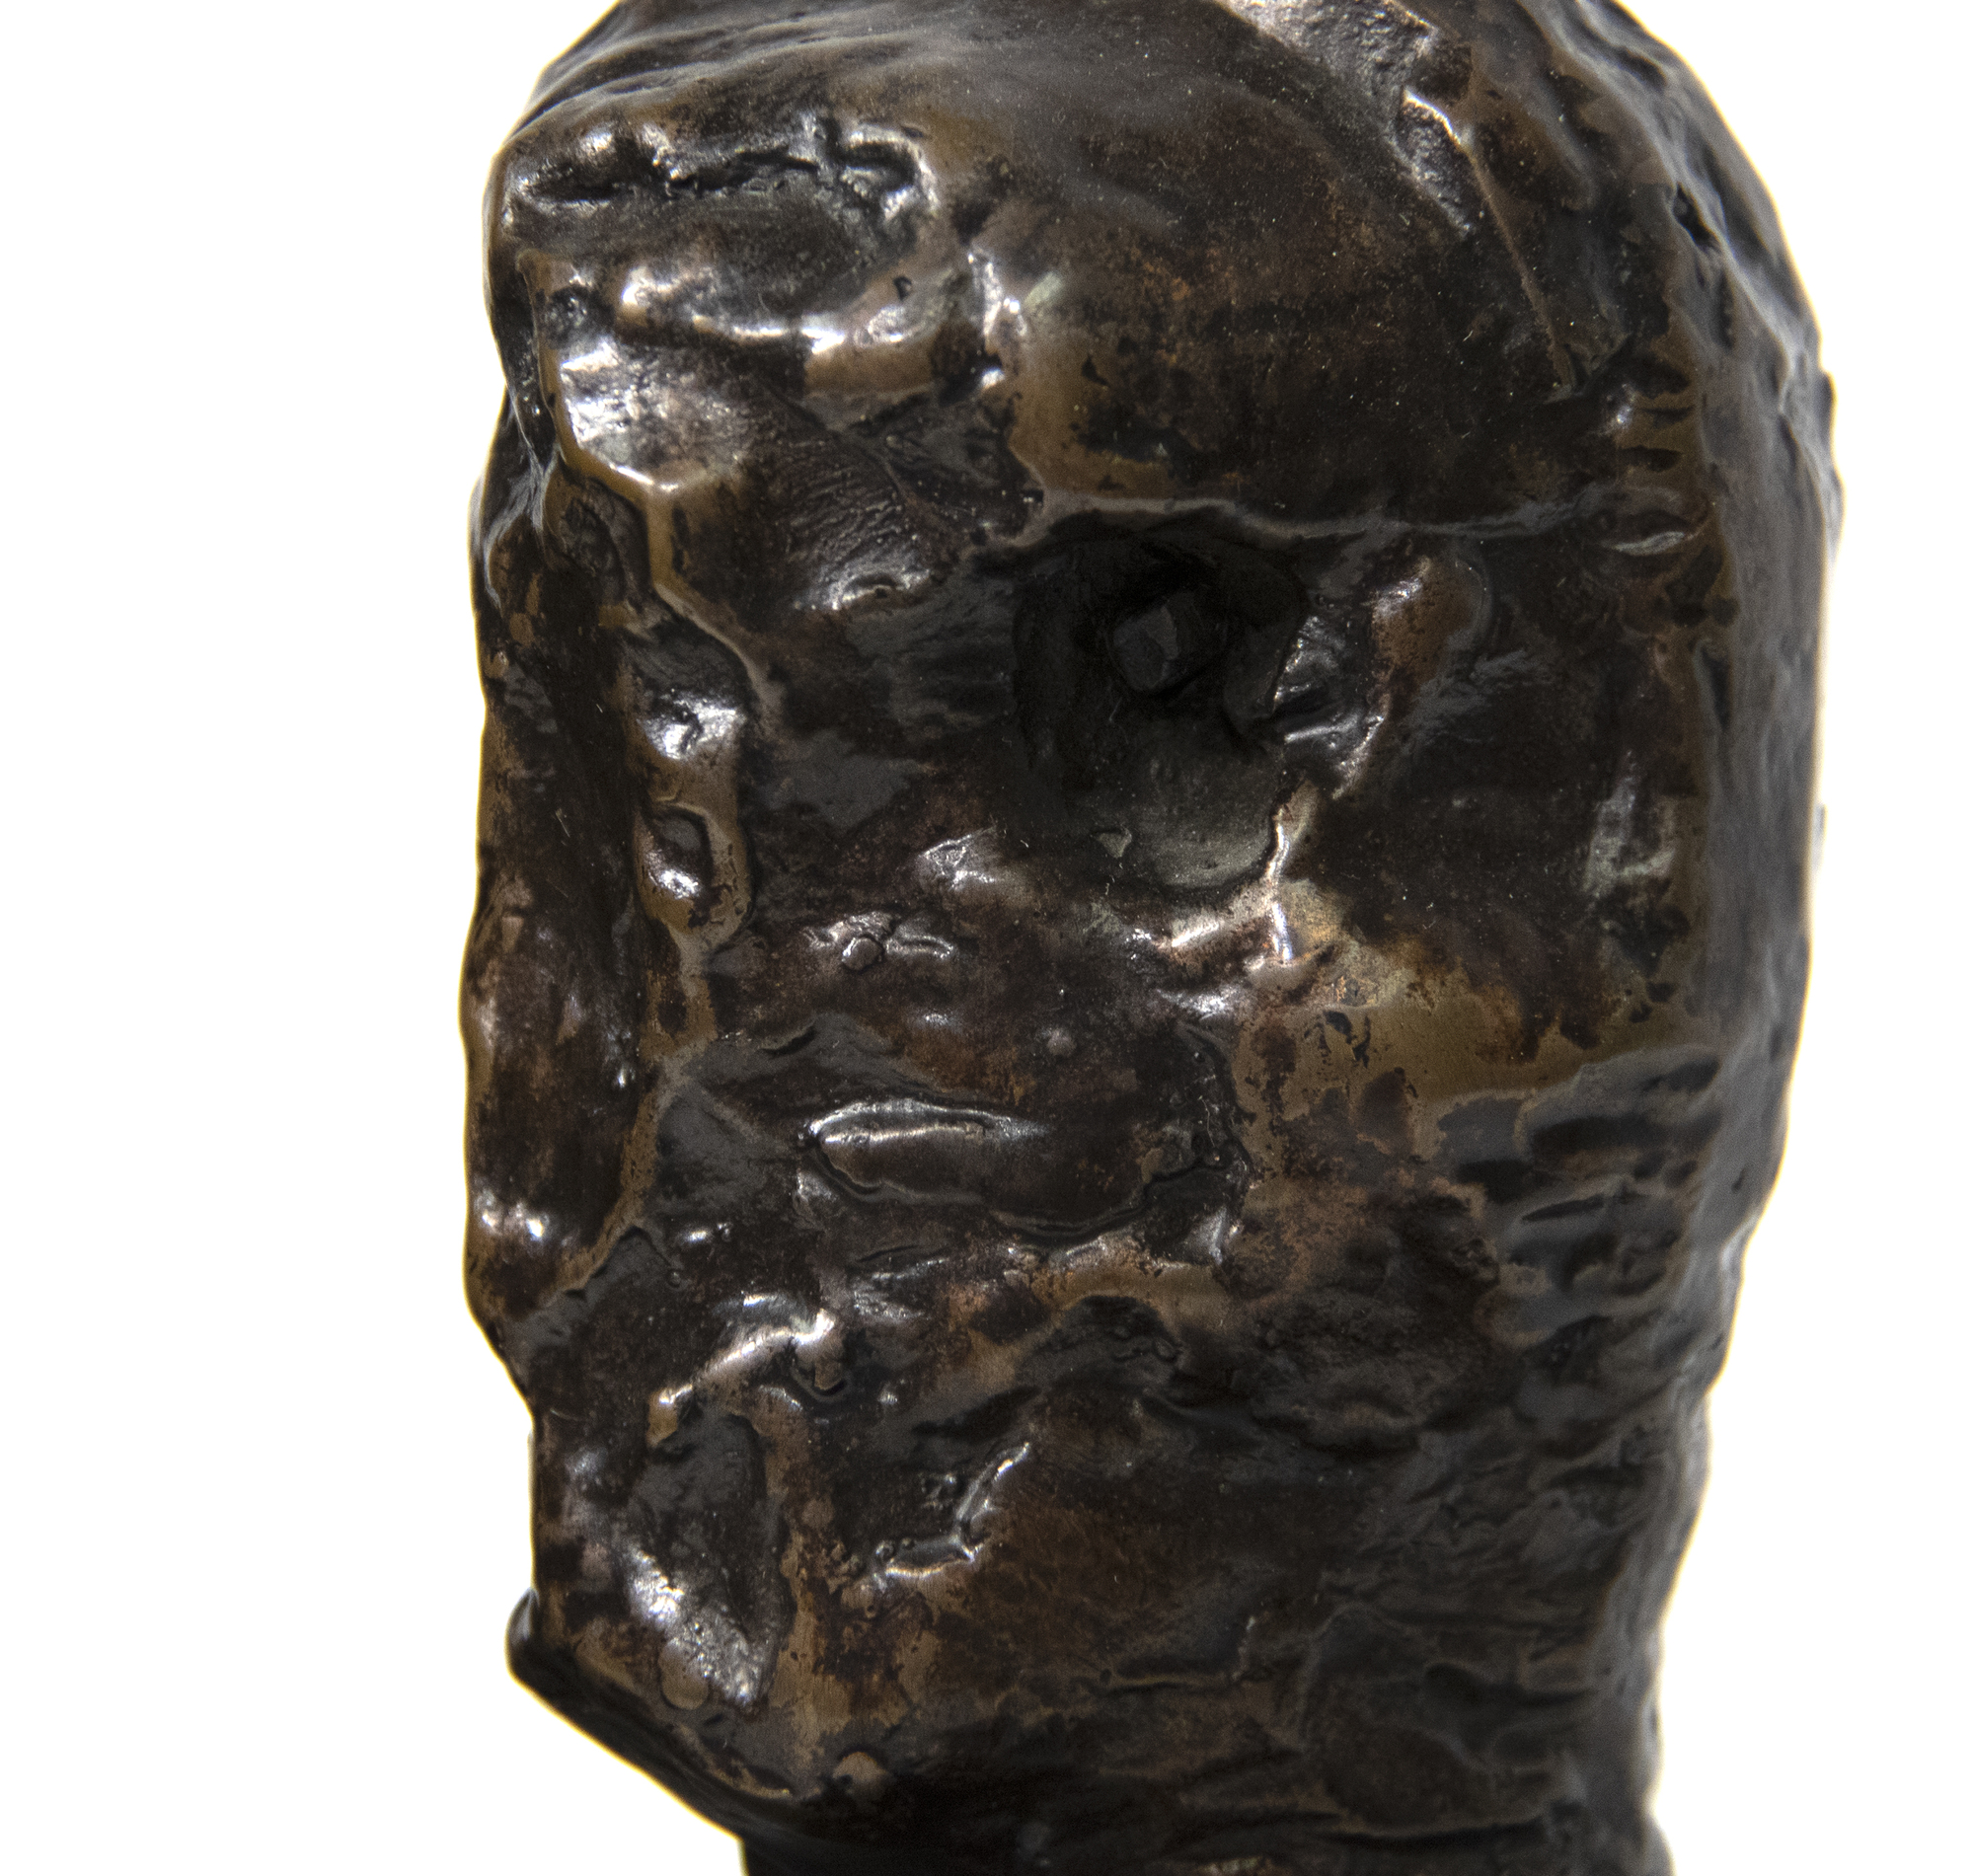 HENRY MOORE - Emperor's Heads - bronze with brown patina - 6 3/4 x 8 1/4 x 4 1/2 in.